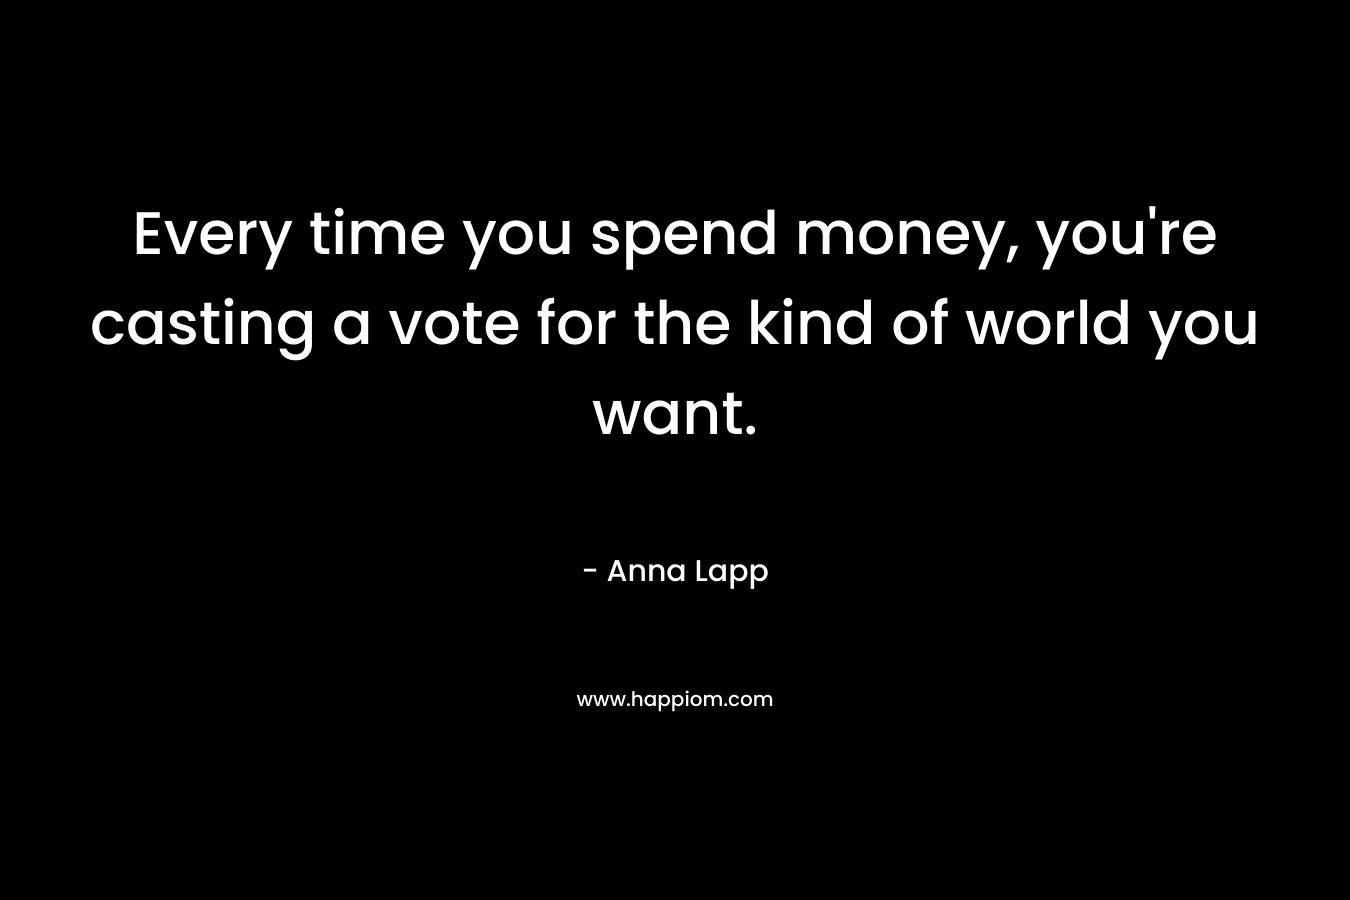 Every time you spend money, you’re casting a vote for the kind of world you want. – Anna Lapp